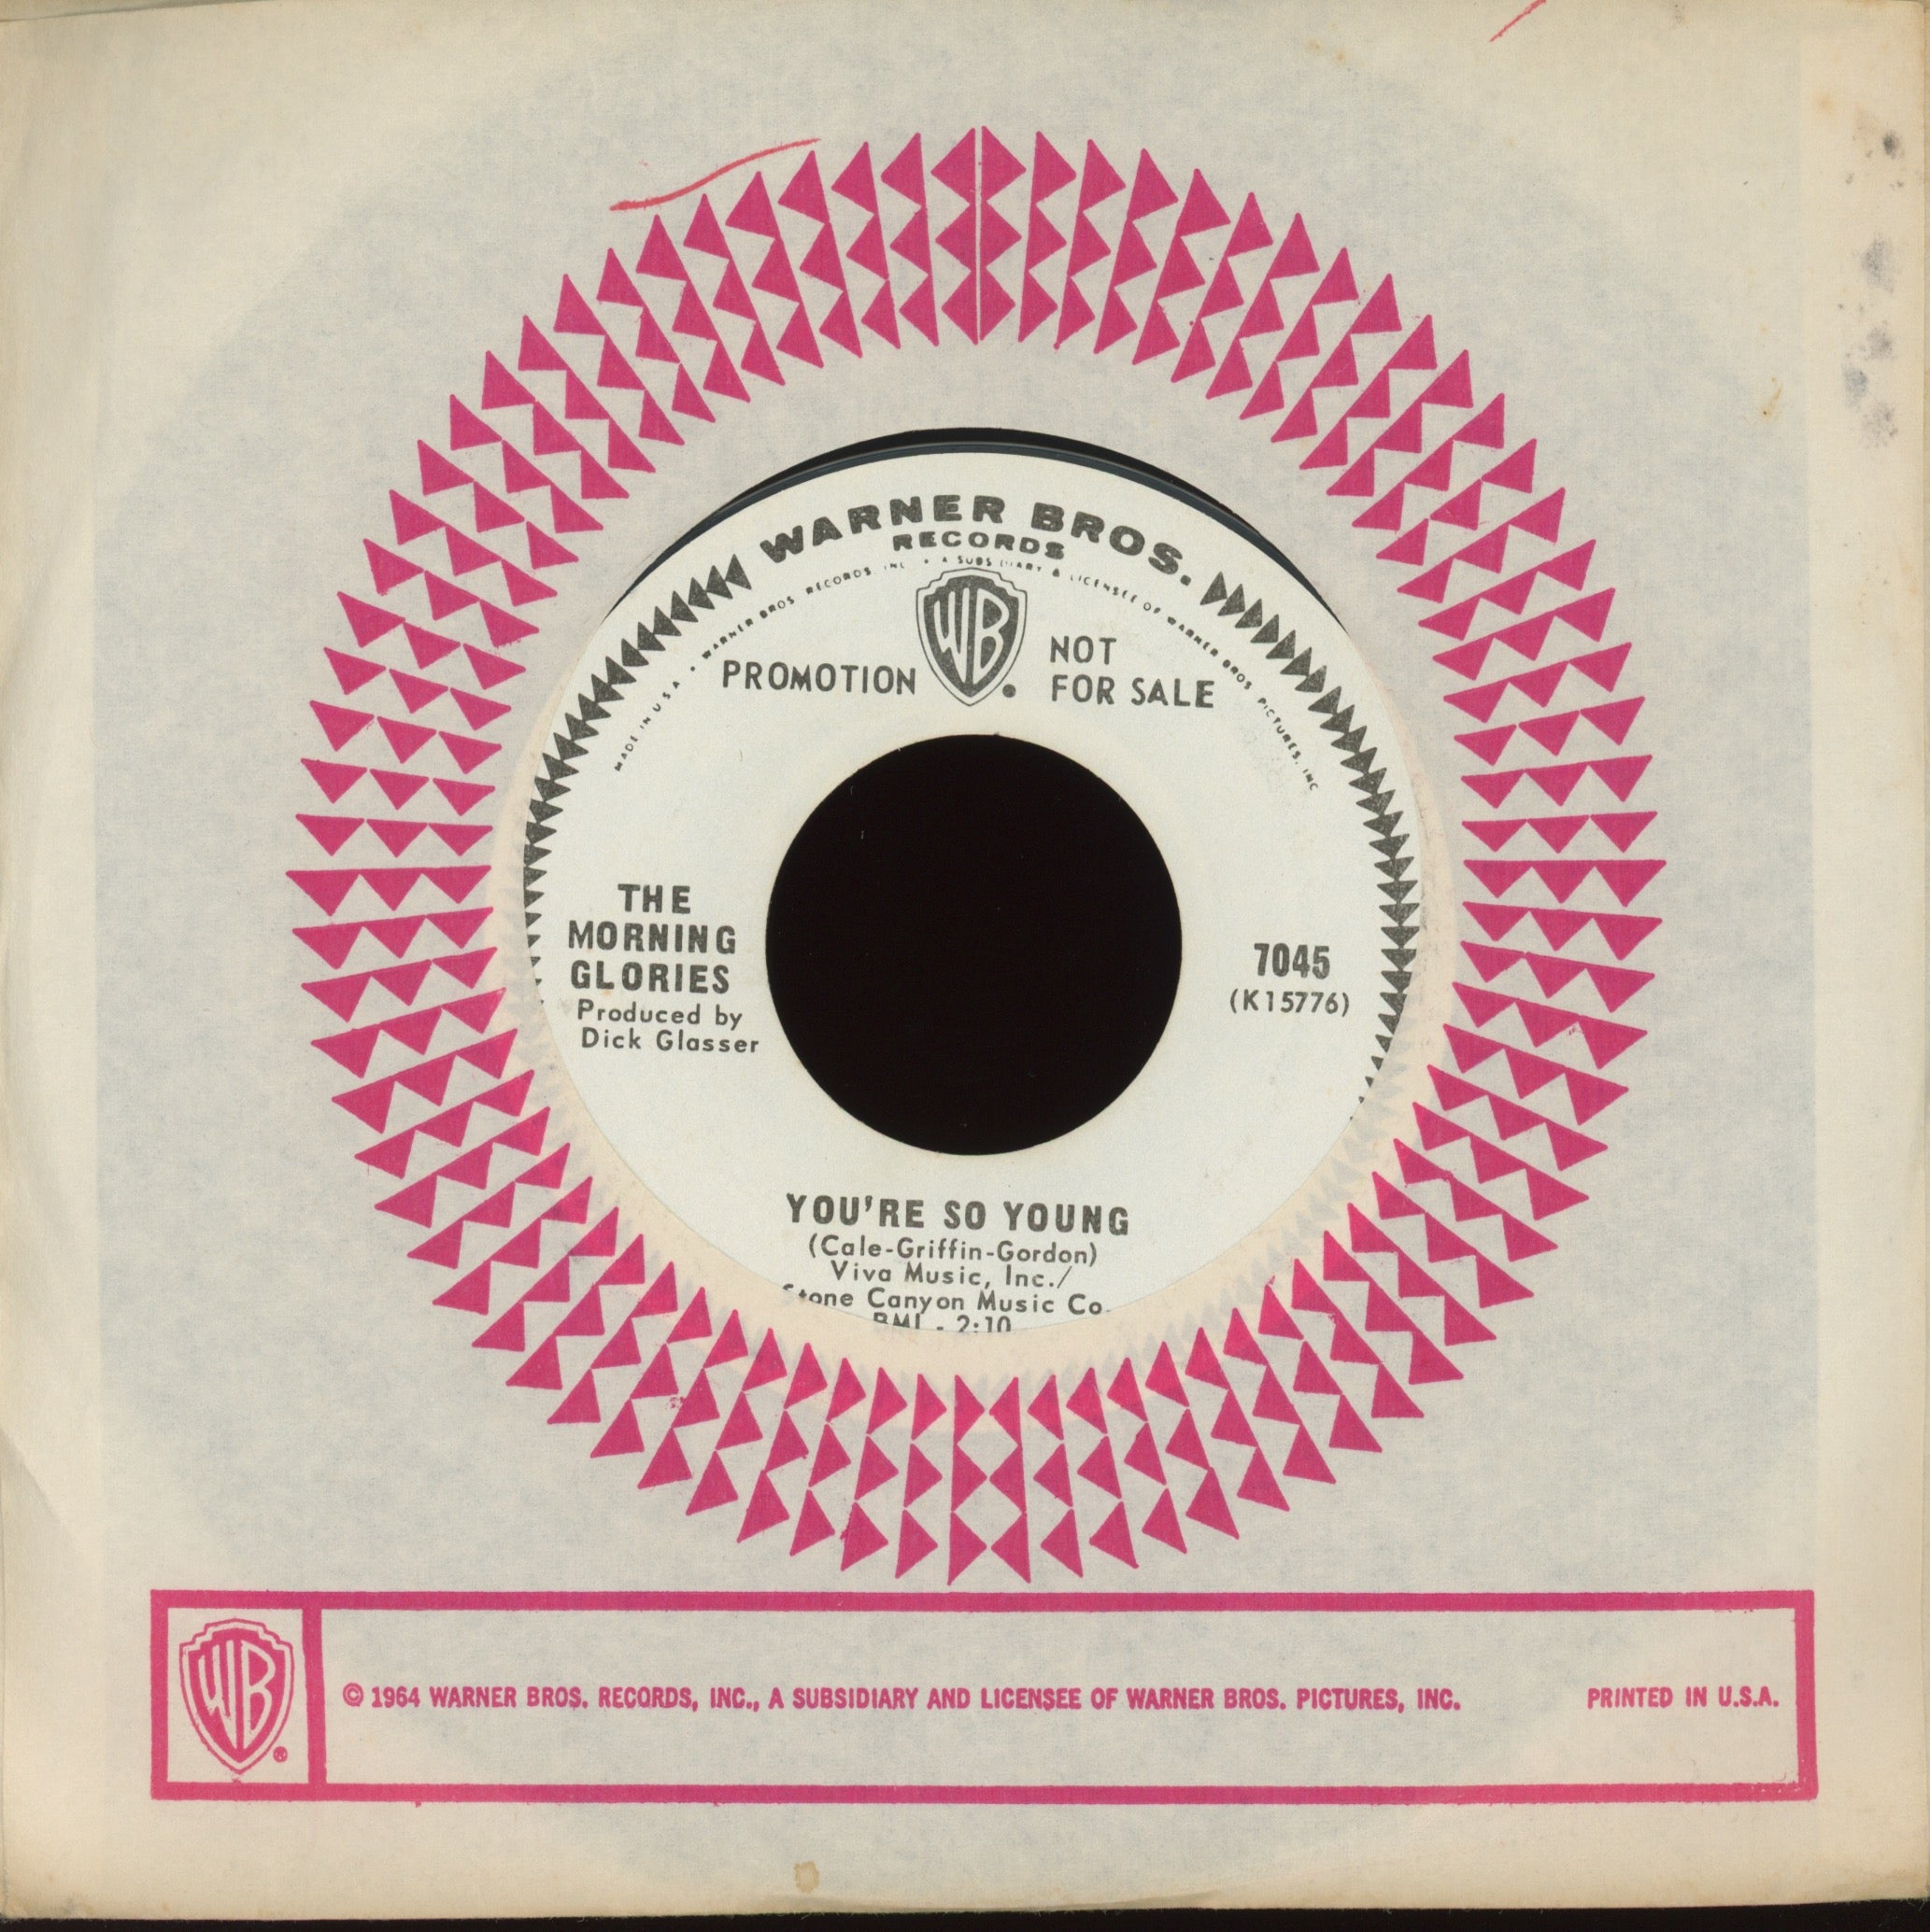 The Morning Glories - Love-In on WB Promo Pop Psych 45